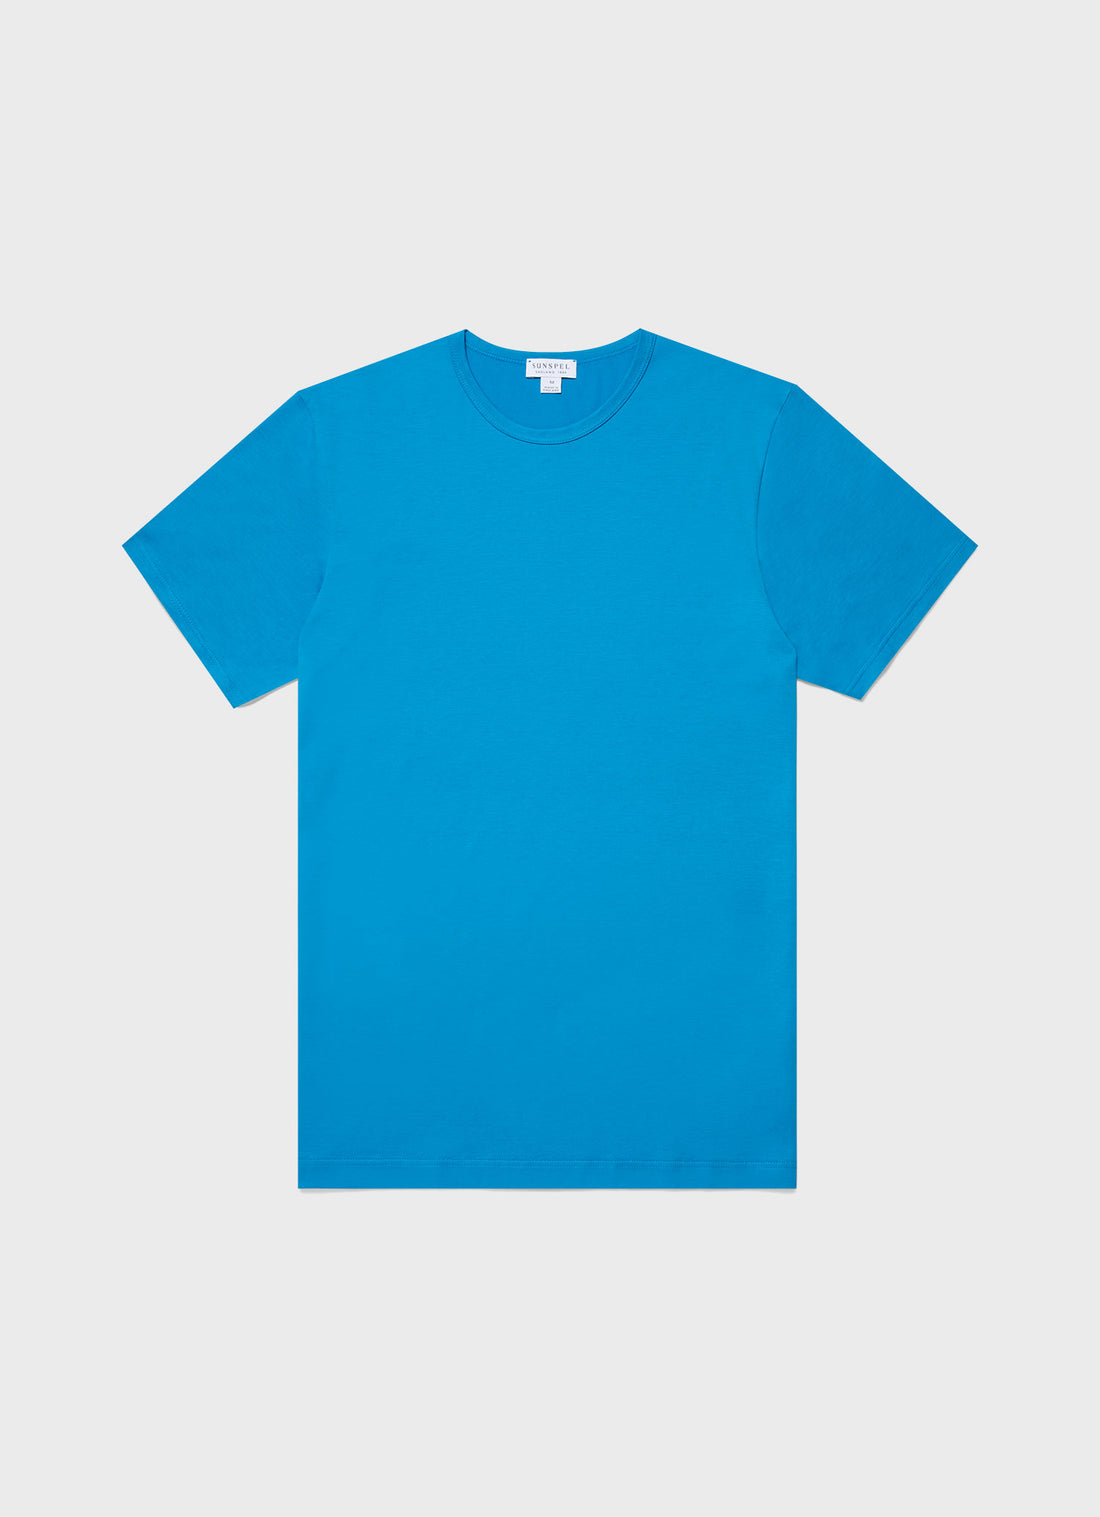 Men's Classic T-shirt in Turquoise